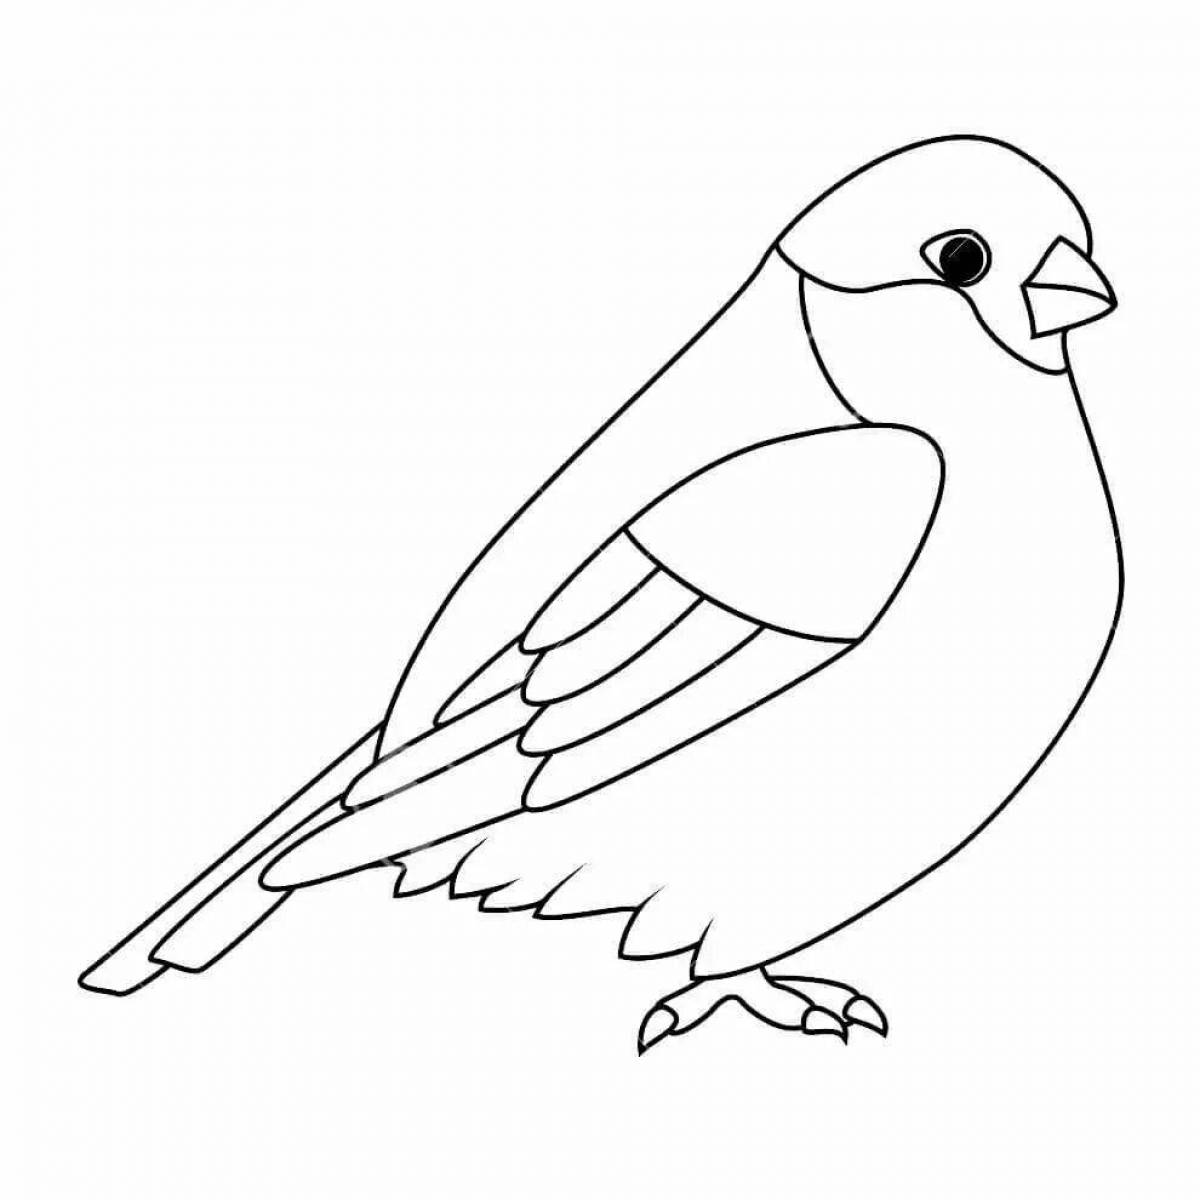 A striking drawing of a titmouse